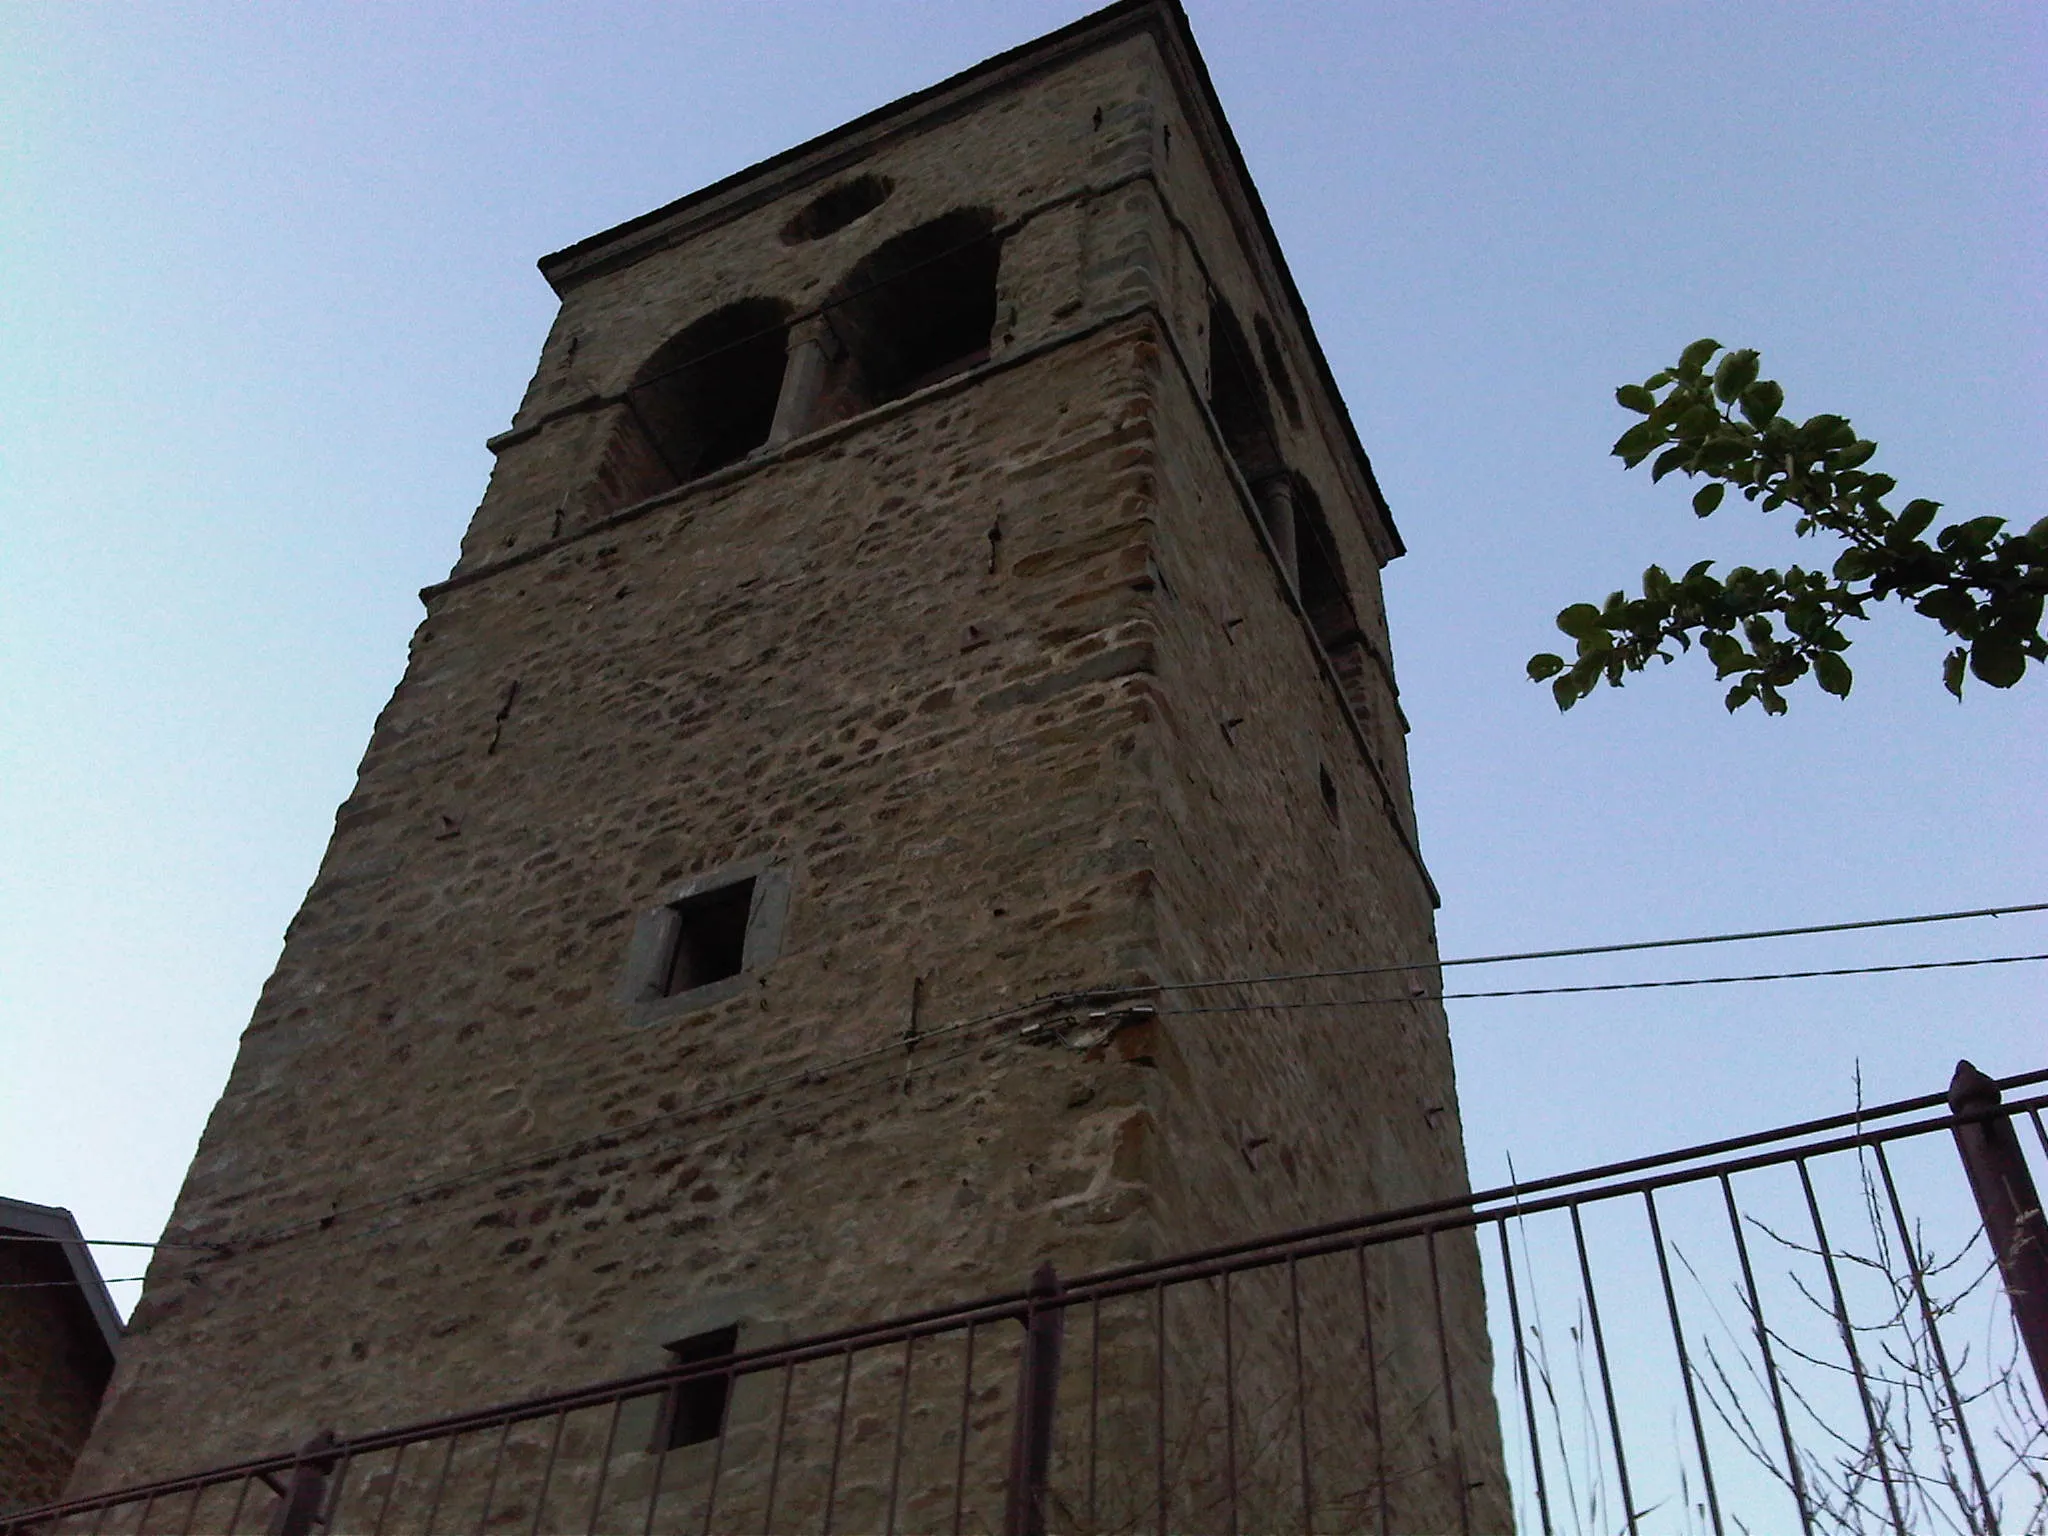 Photo showing: "Il Torrione", now a bell tower, was built in Sant'Andrea Pelago, Italy, by the Montegarullo family in the Middle Age.